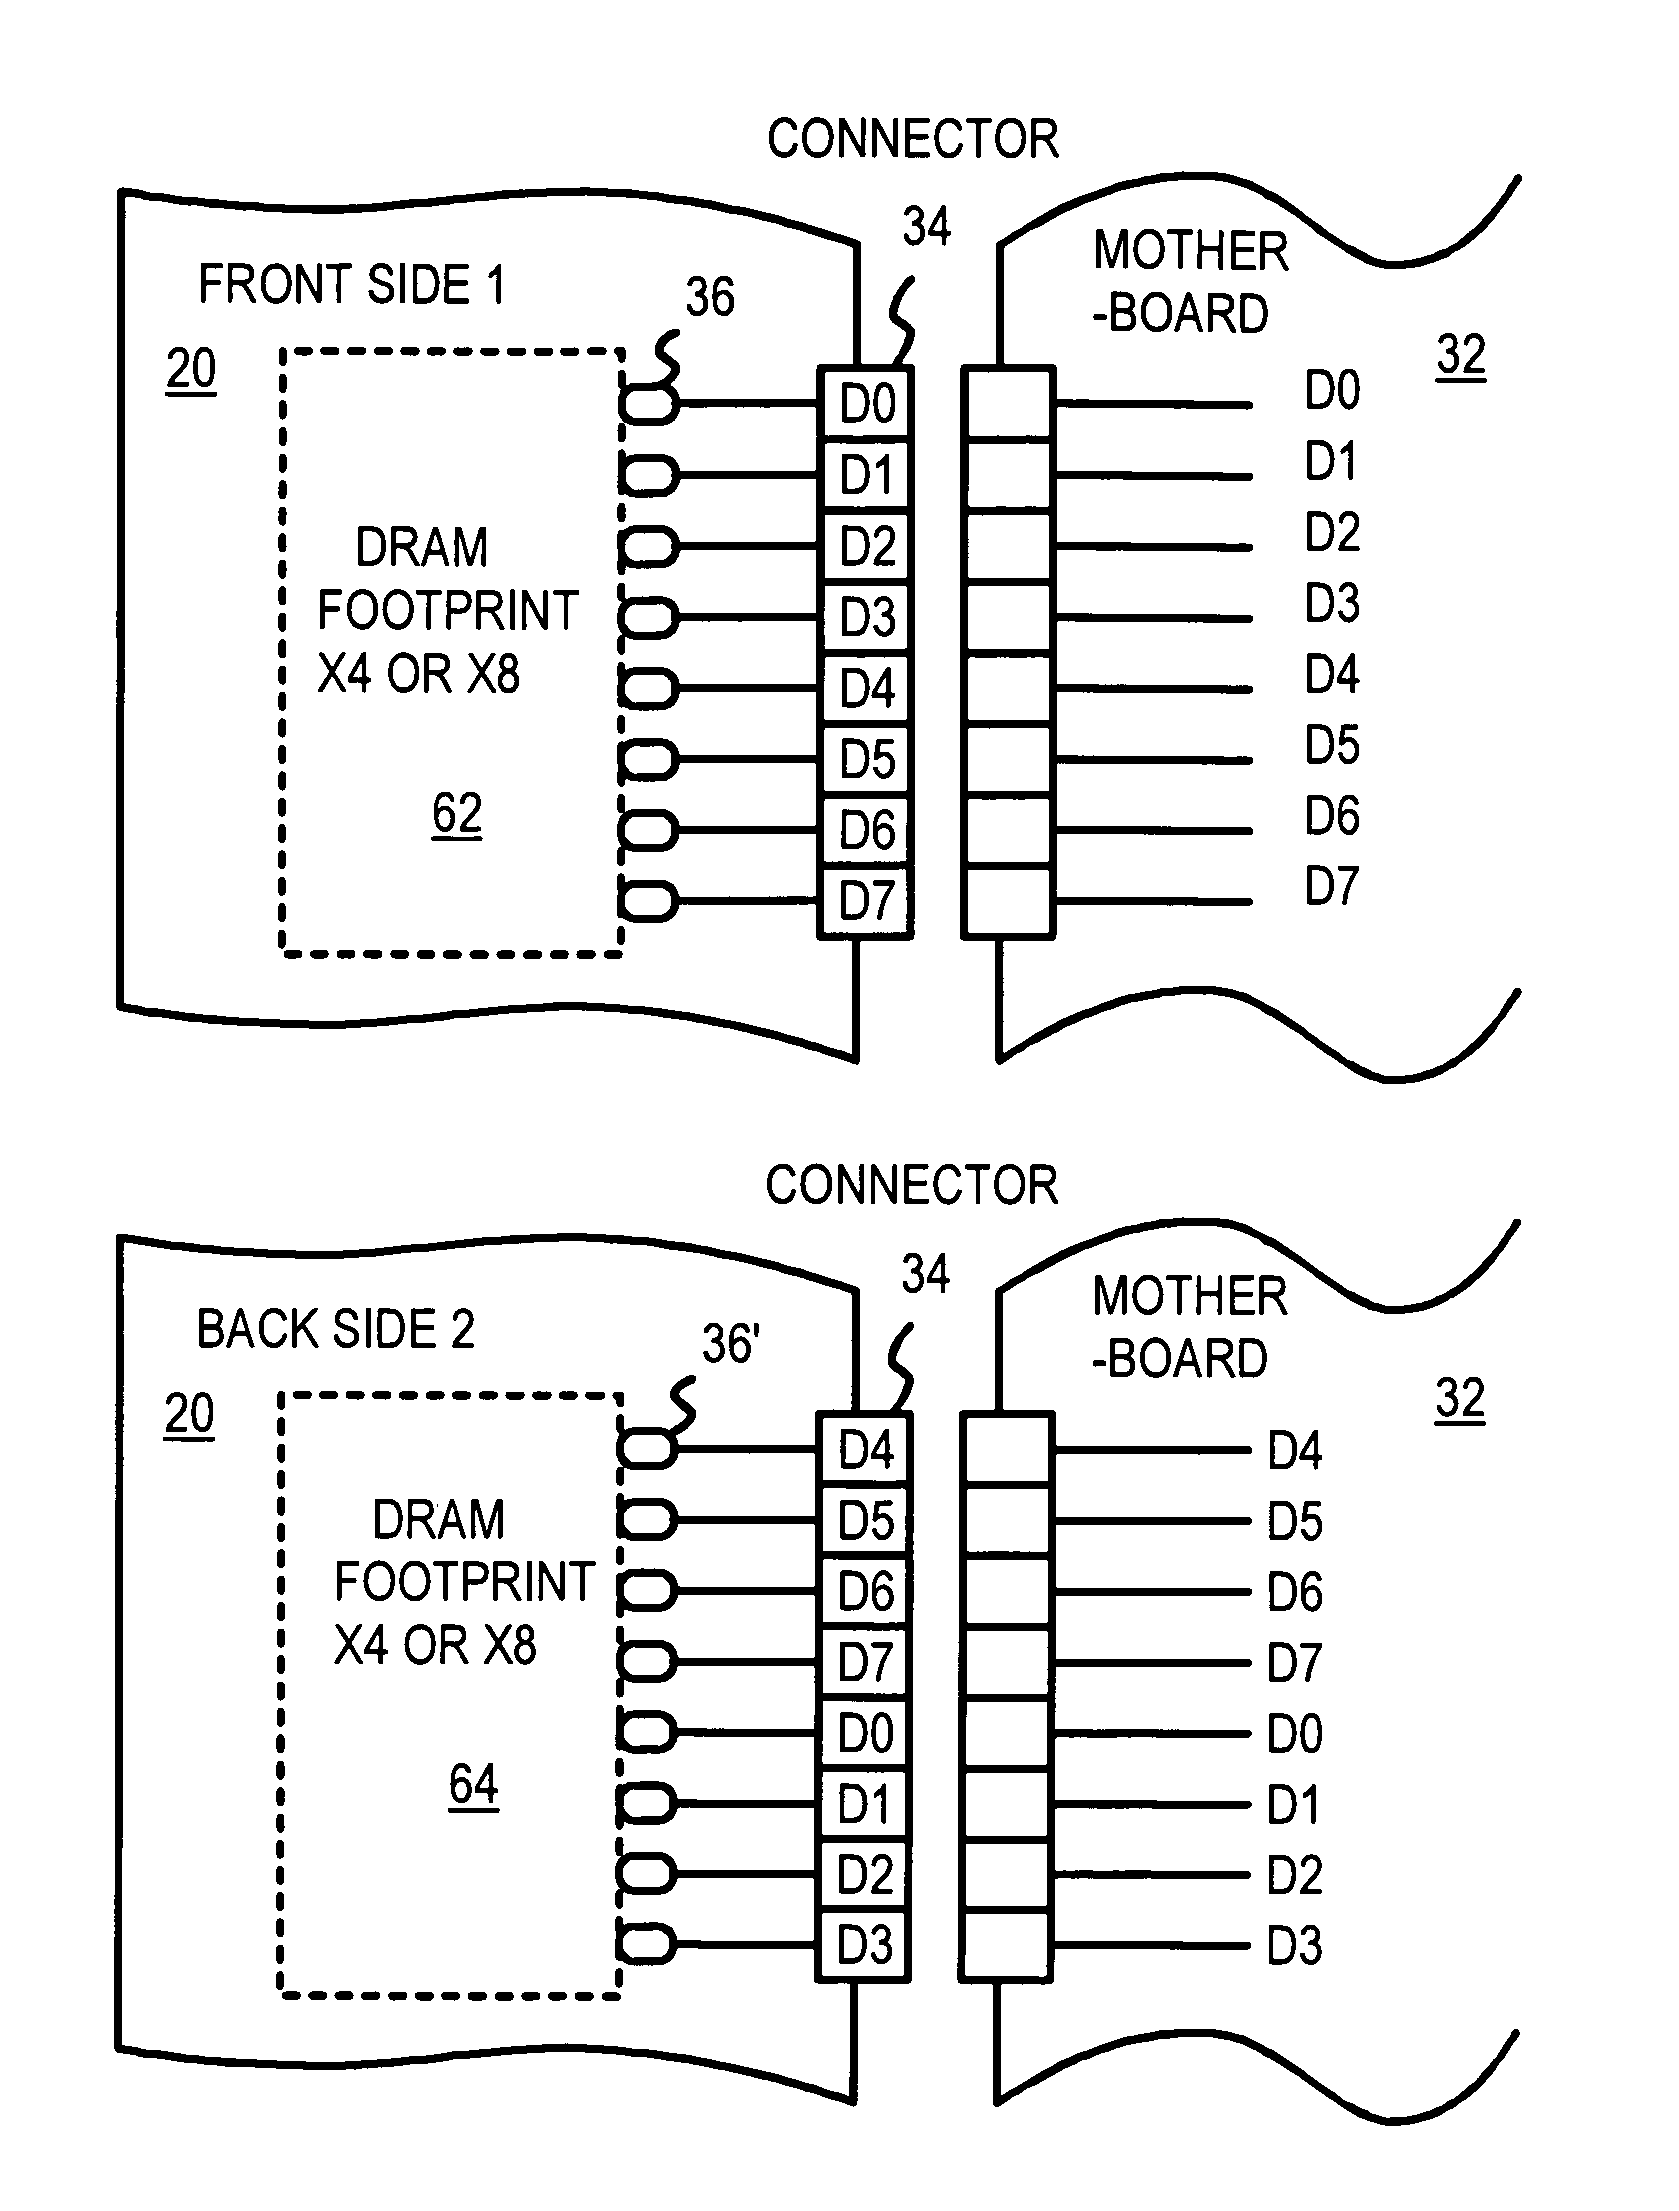 Memory-module board layout for use with memory chips of different data widths